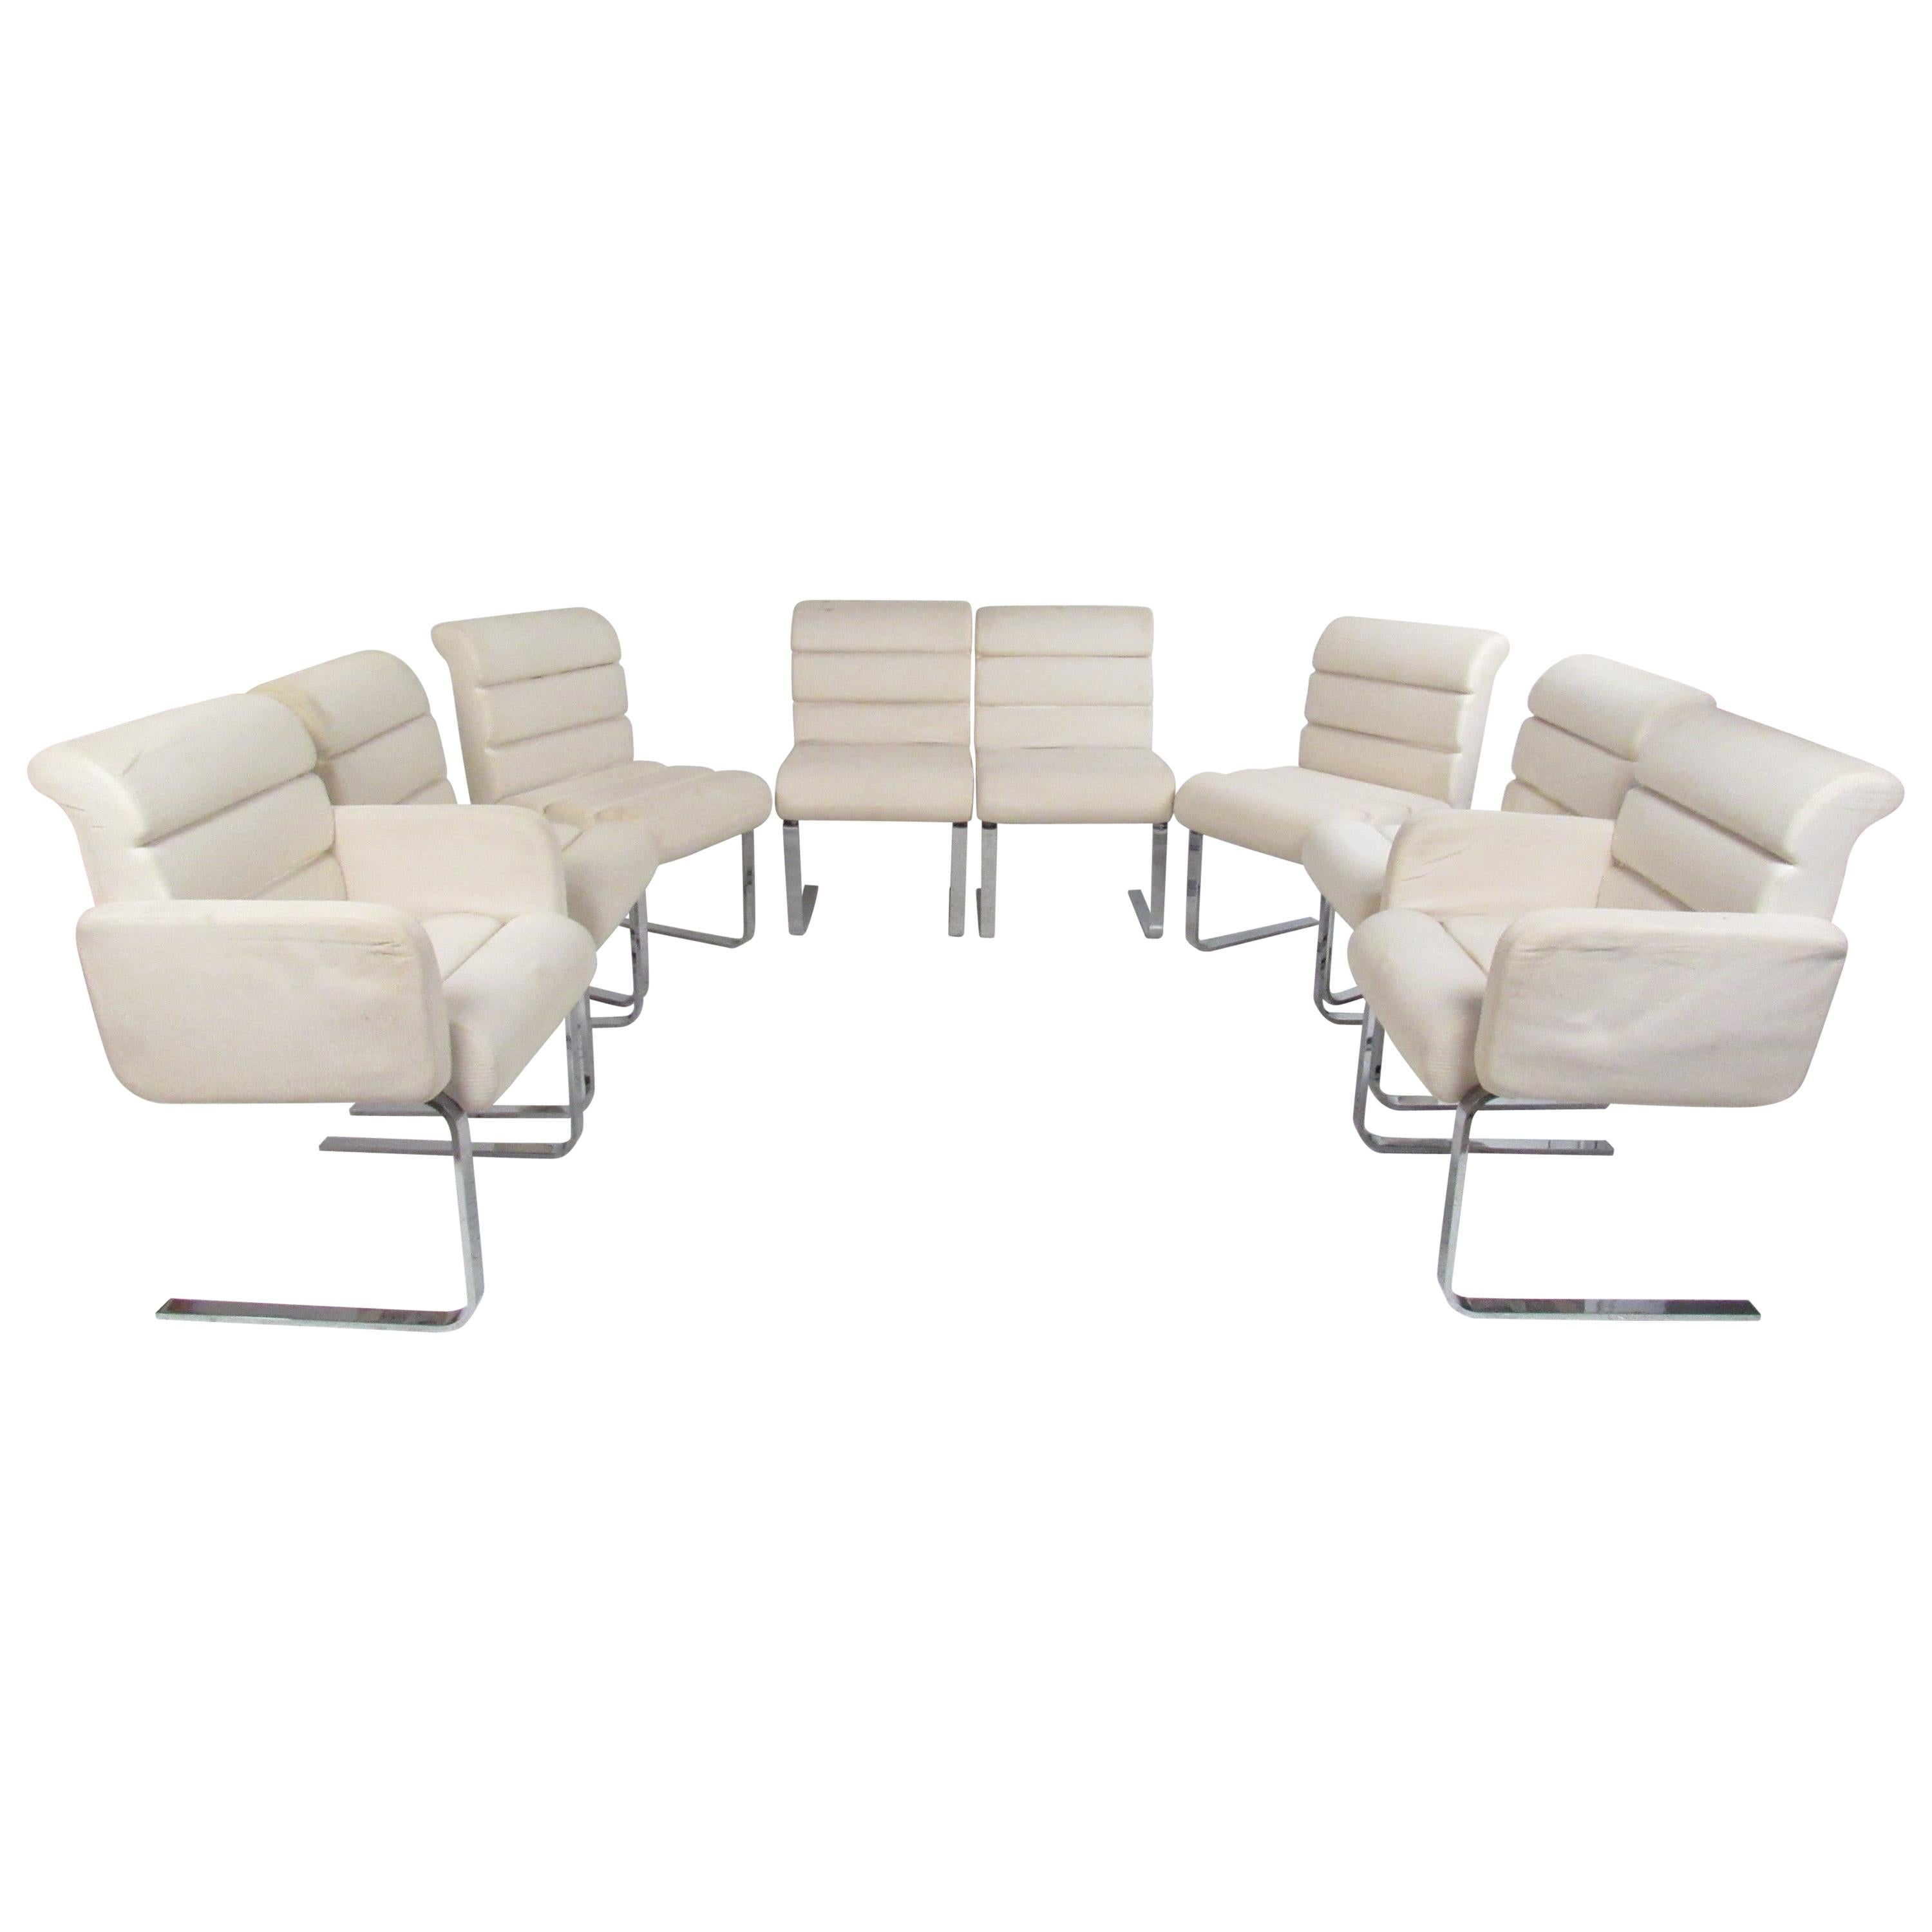 Set of Eight Midcentury Laguna Cantilever Dining Chairs by Mariani for Pace